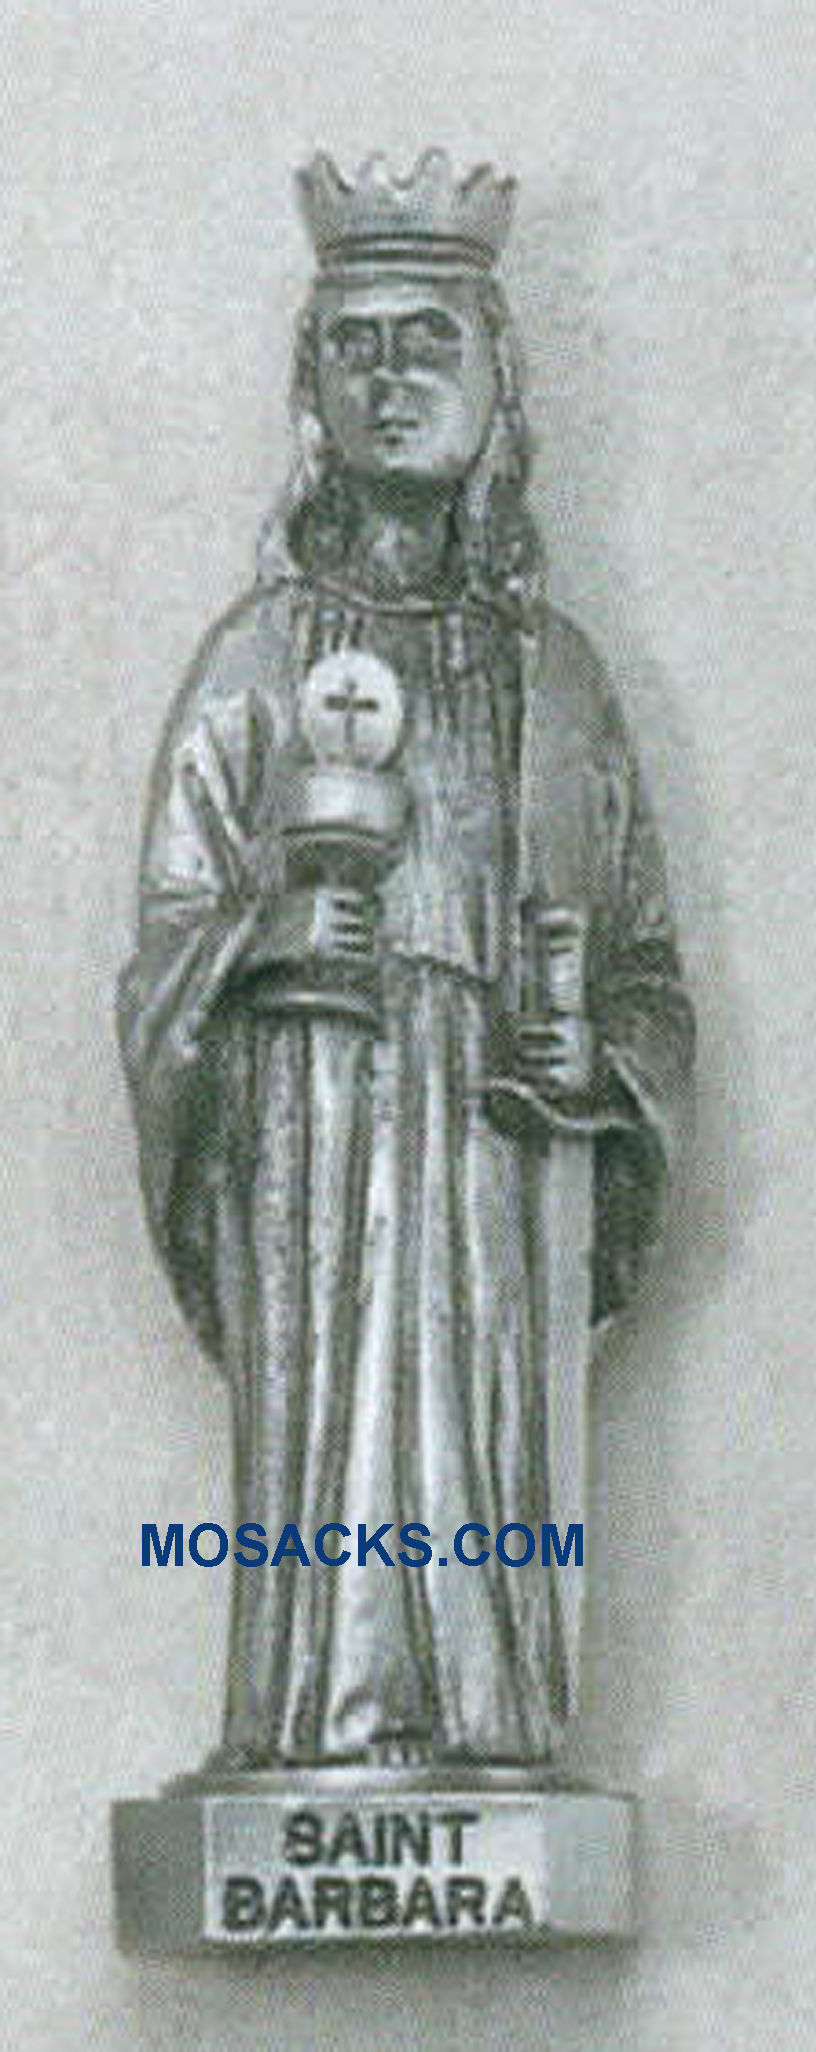 Pewter Statue St. Barbara - Retired PW77806  This St. Barbara Statue is made of Pewter and 3 inches in height, PW77806.